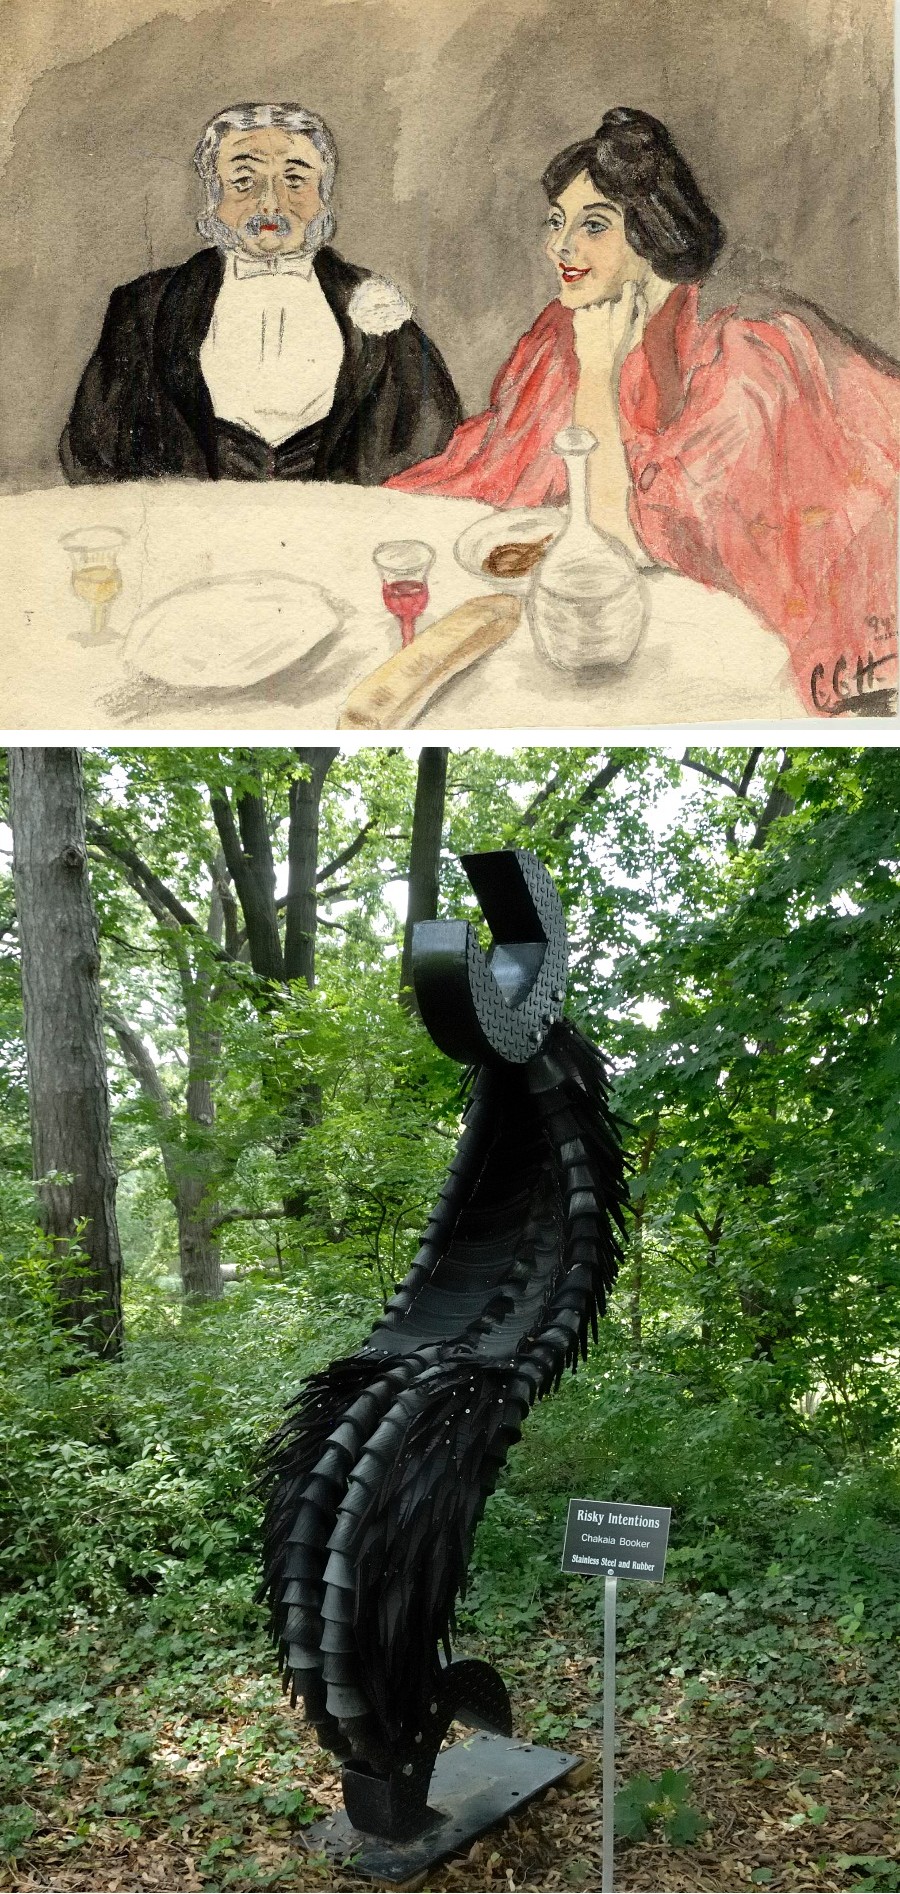 Top: Drawing by Ethel Cuthbert Harding, 1894. (Ruth Mott Foundation Archives) Bottom: Risky Intentions by Chakaia Booker, a piece on loan from the Mott-Warsh Collection, is on display at Applewood in Flint. It was installed in 2007.